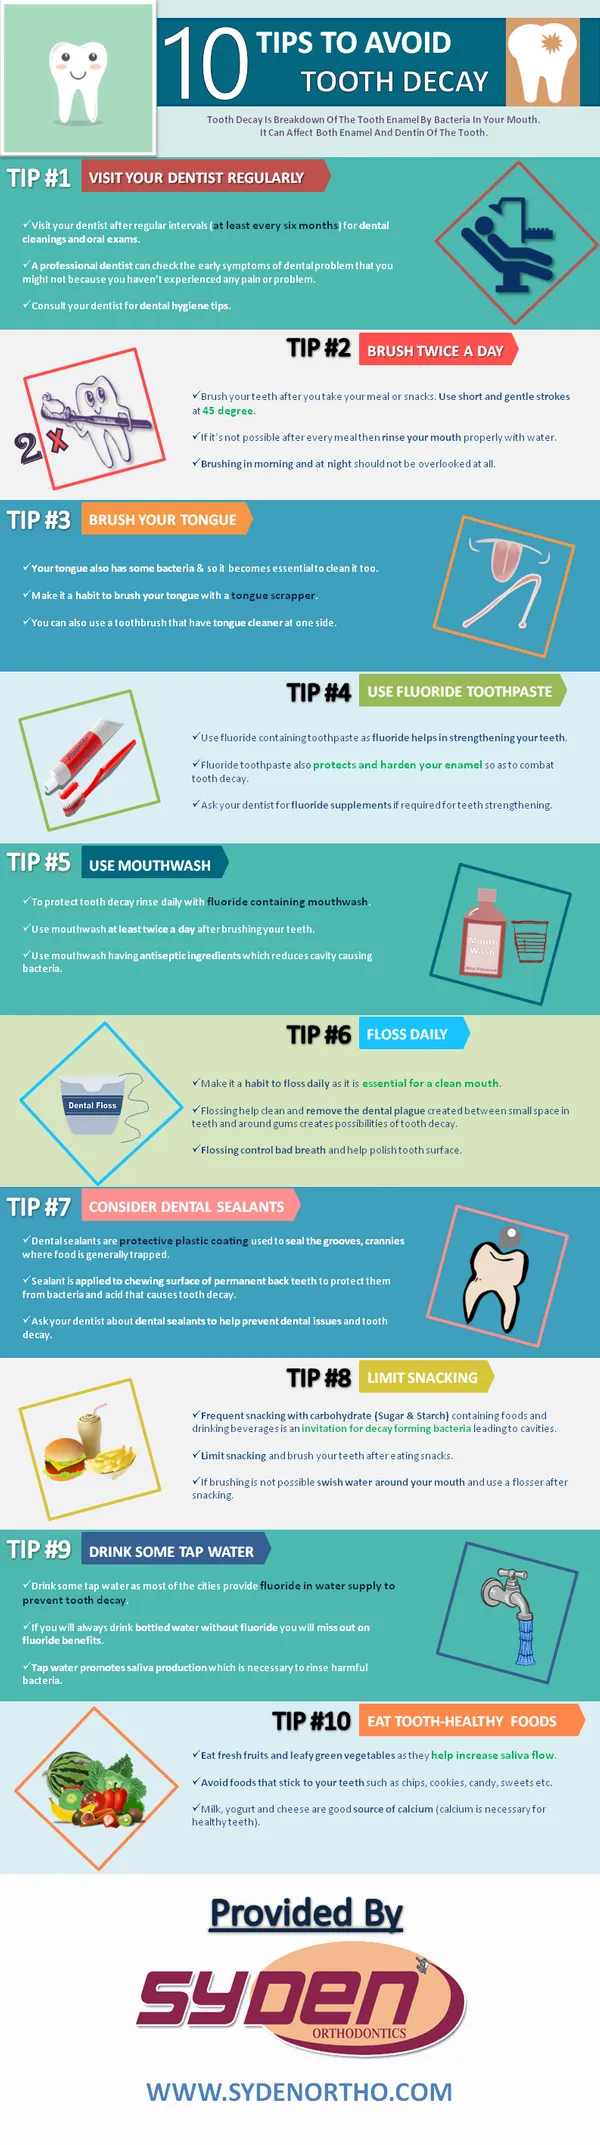 tips-to-avoid-dental-decay-infographic